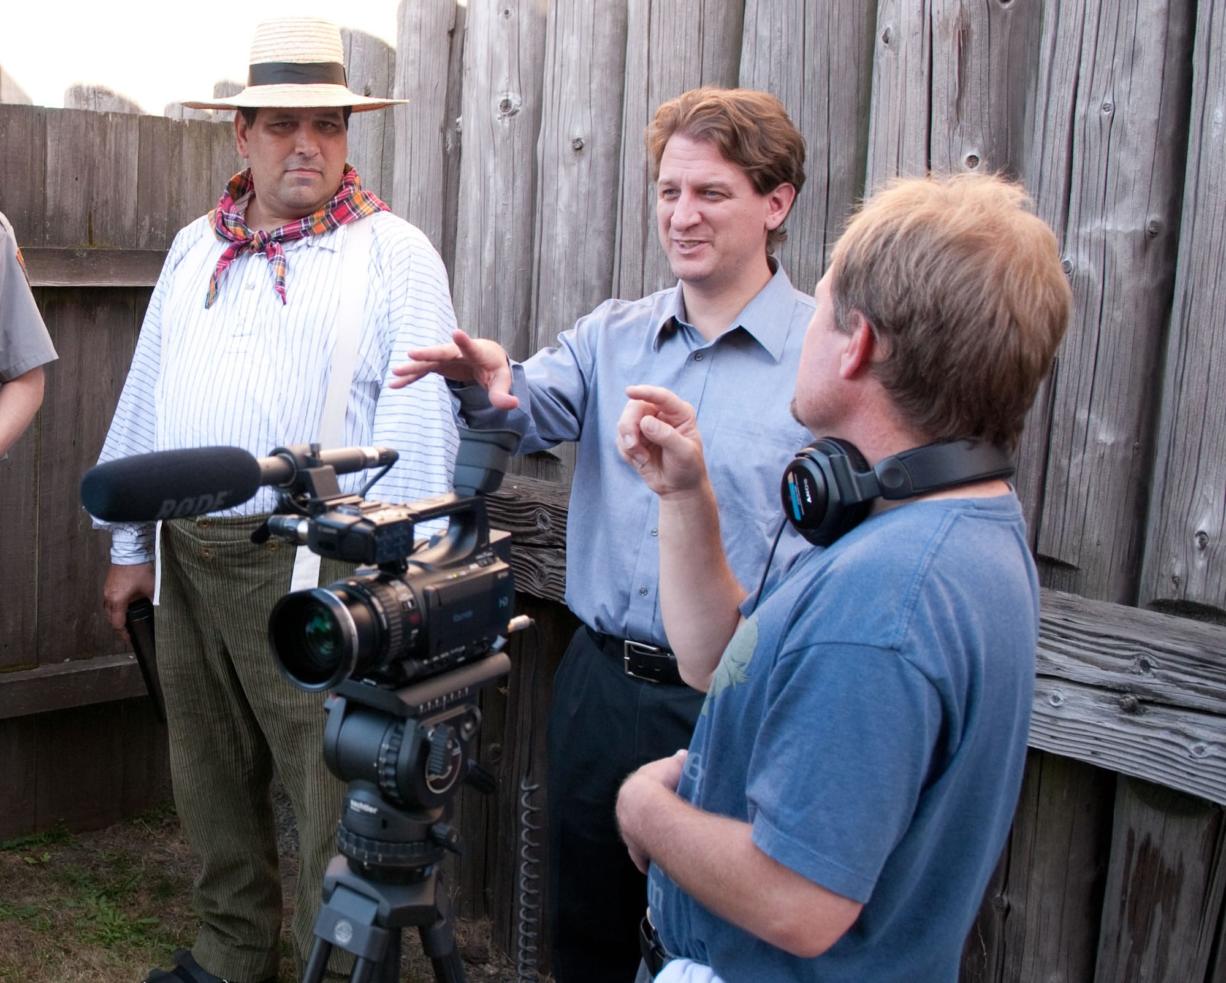 Brett Oppegaard, center, sets up a scene during production of a &quot;Kanaka Village&quot; video segment for the mobile storytelling app at Fort Vancouver National Historic Site.